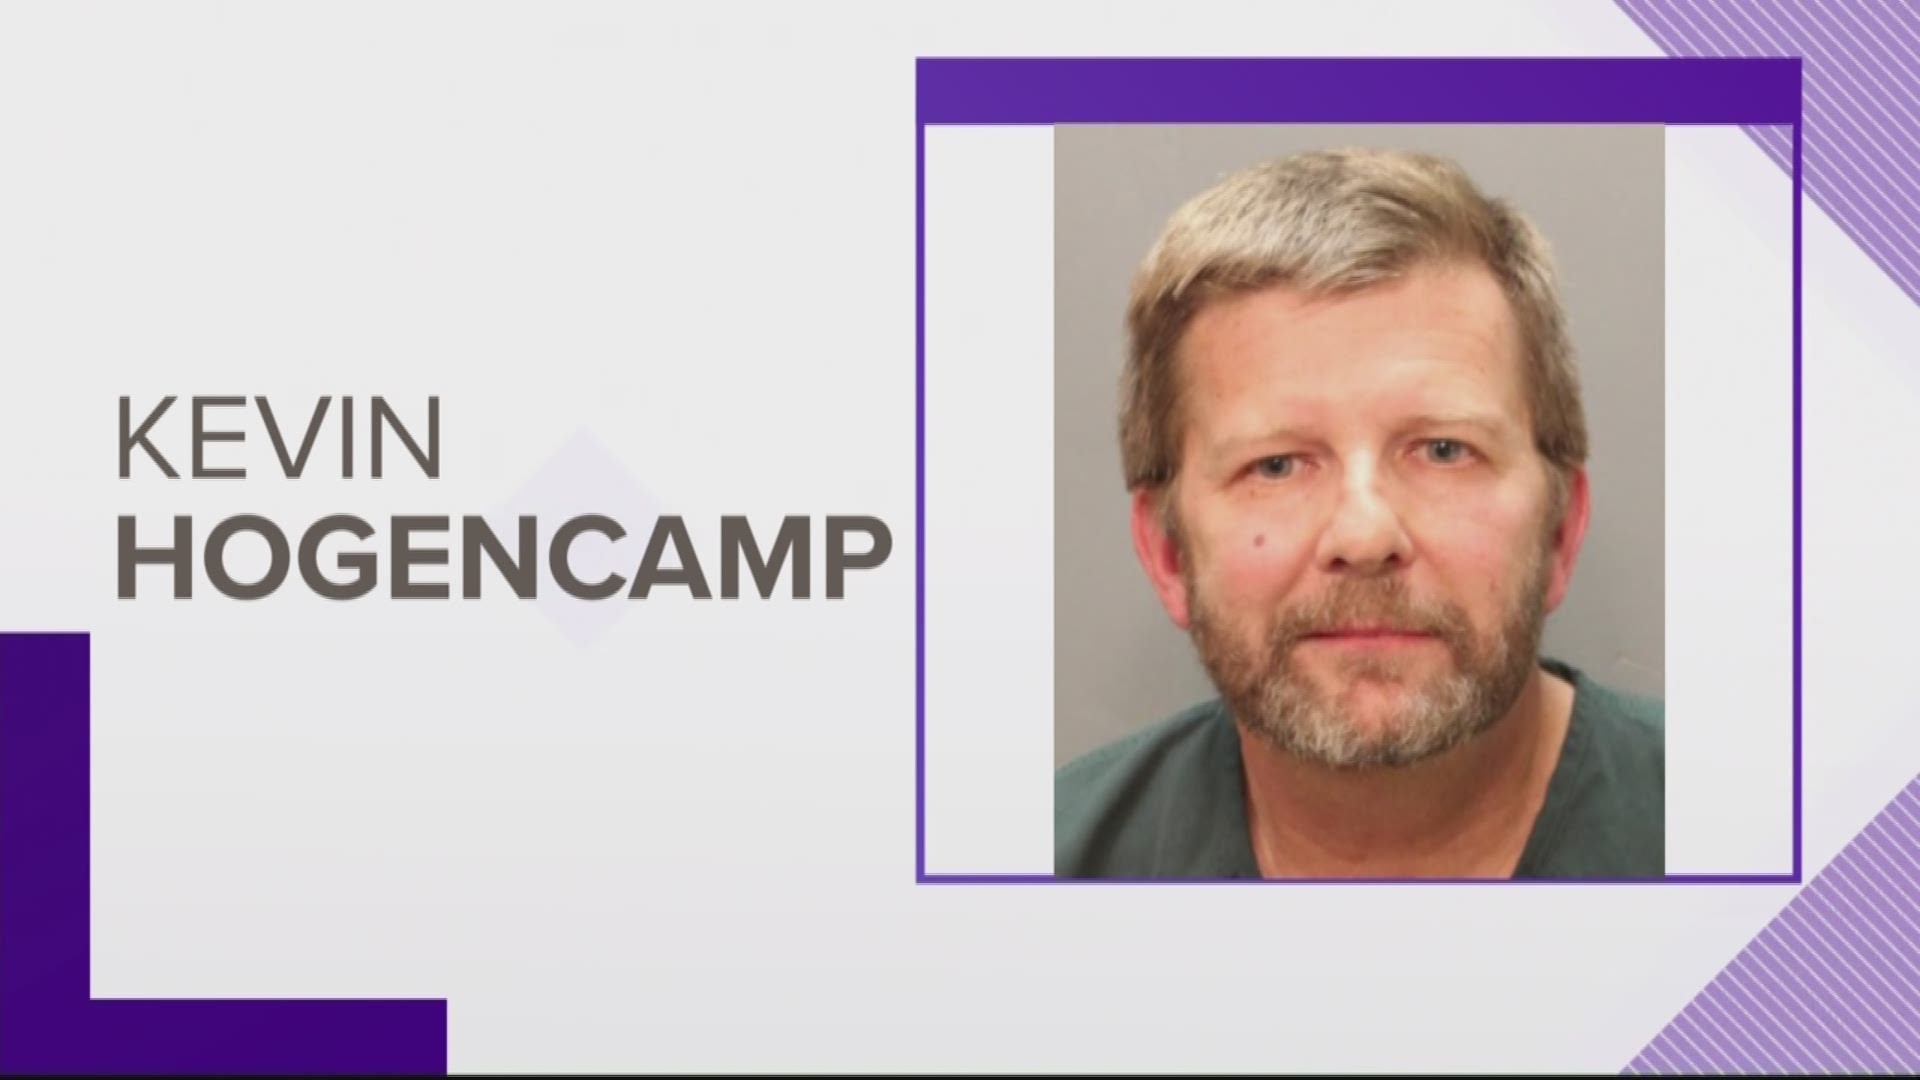 The Atlantic Beach Deputy City Manager, Kevin Hogencamp, was arrested over the weekend and charged with driving under the influence, according to the Jacksonville Sheriff's Office.